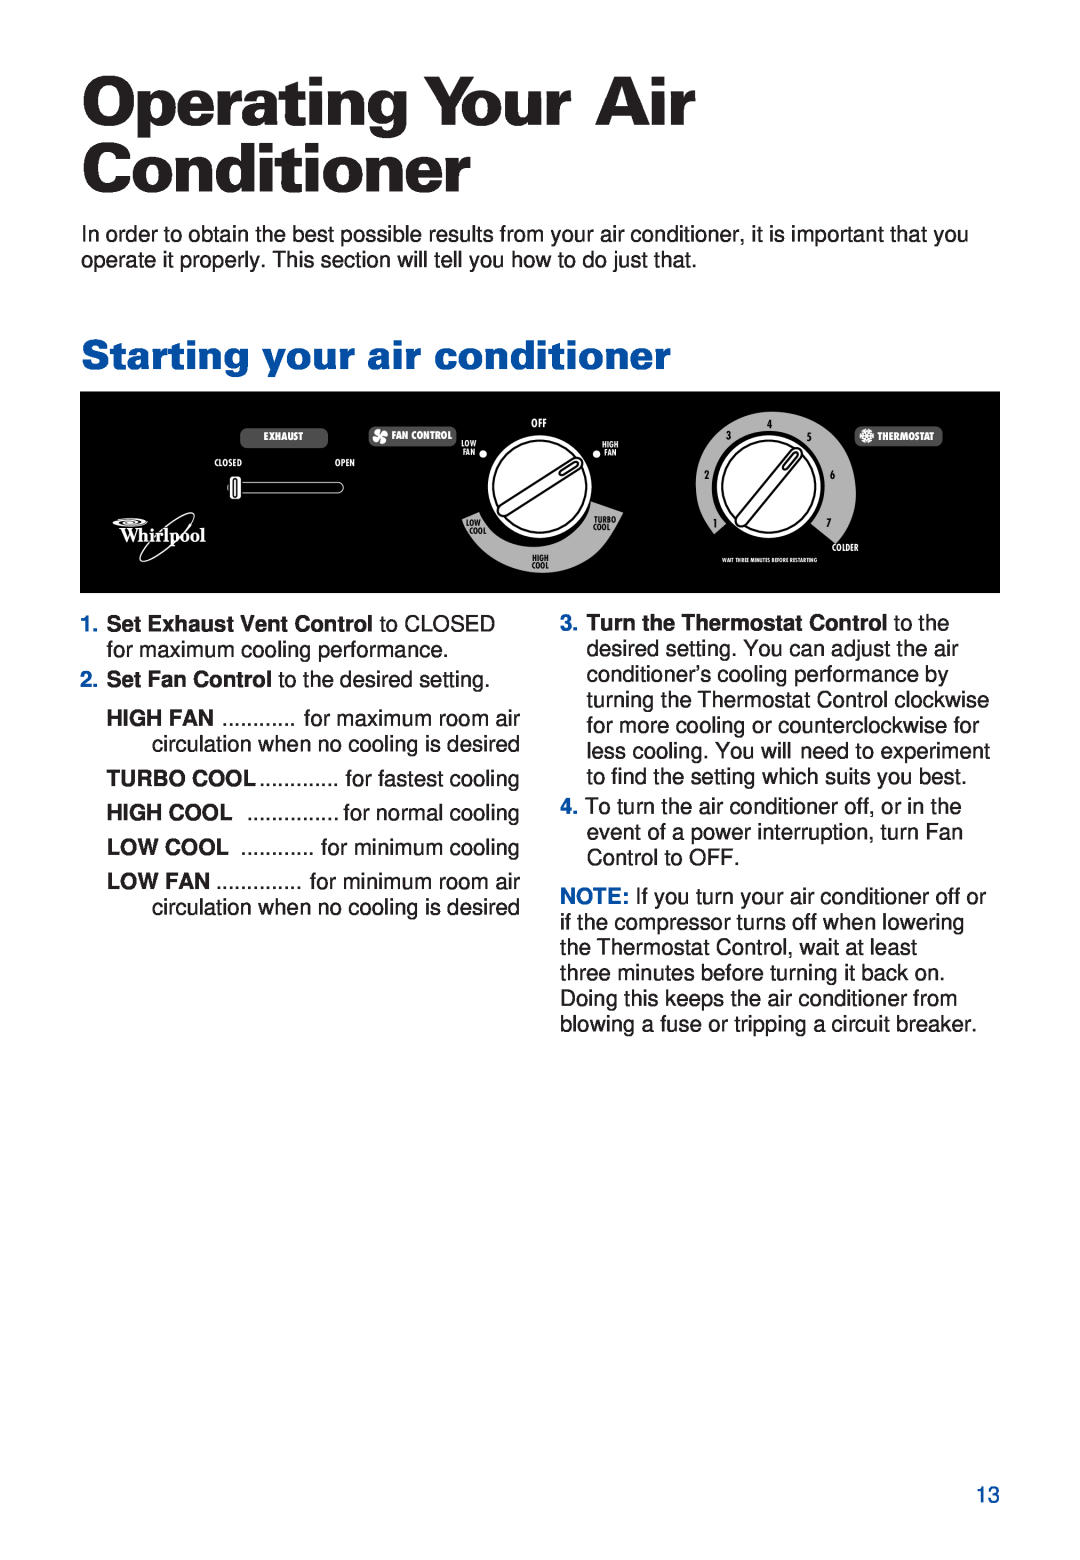 Whirlpool ACS052XH1 warranty Operating Your Air Conditioner, Starting your air conditioner 